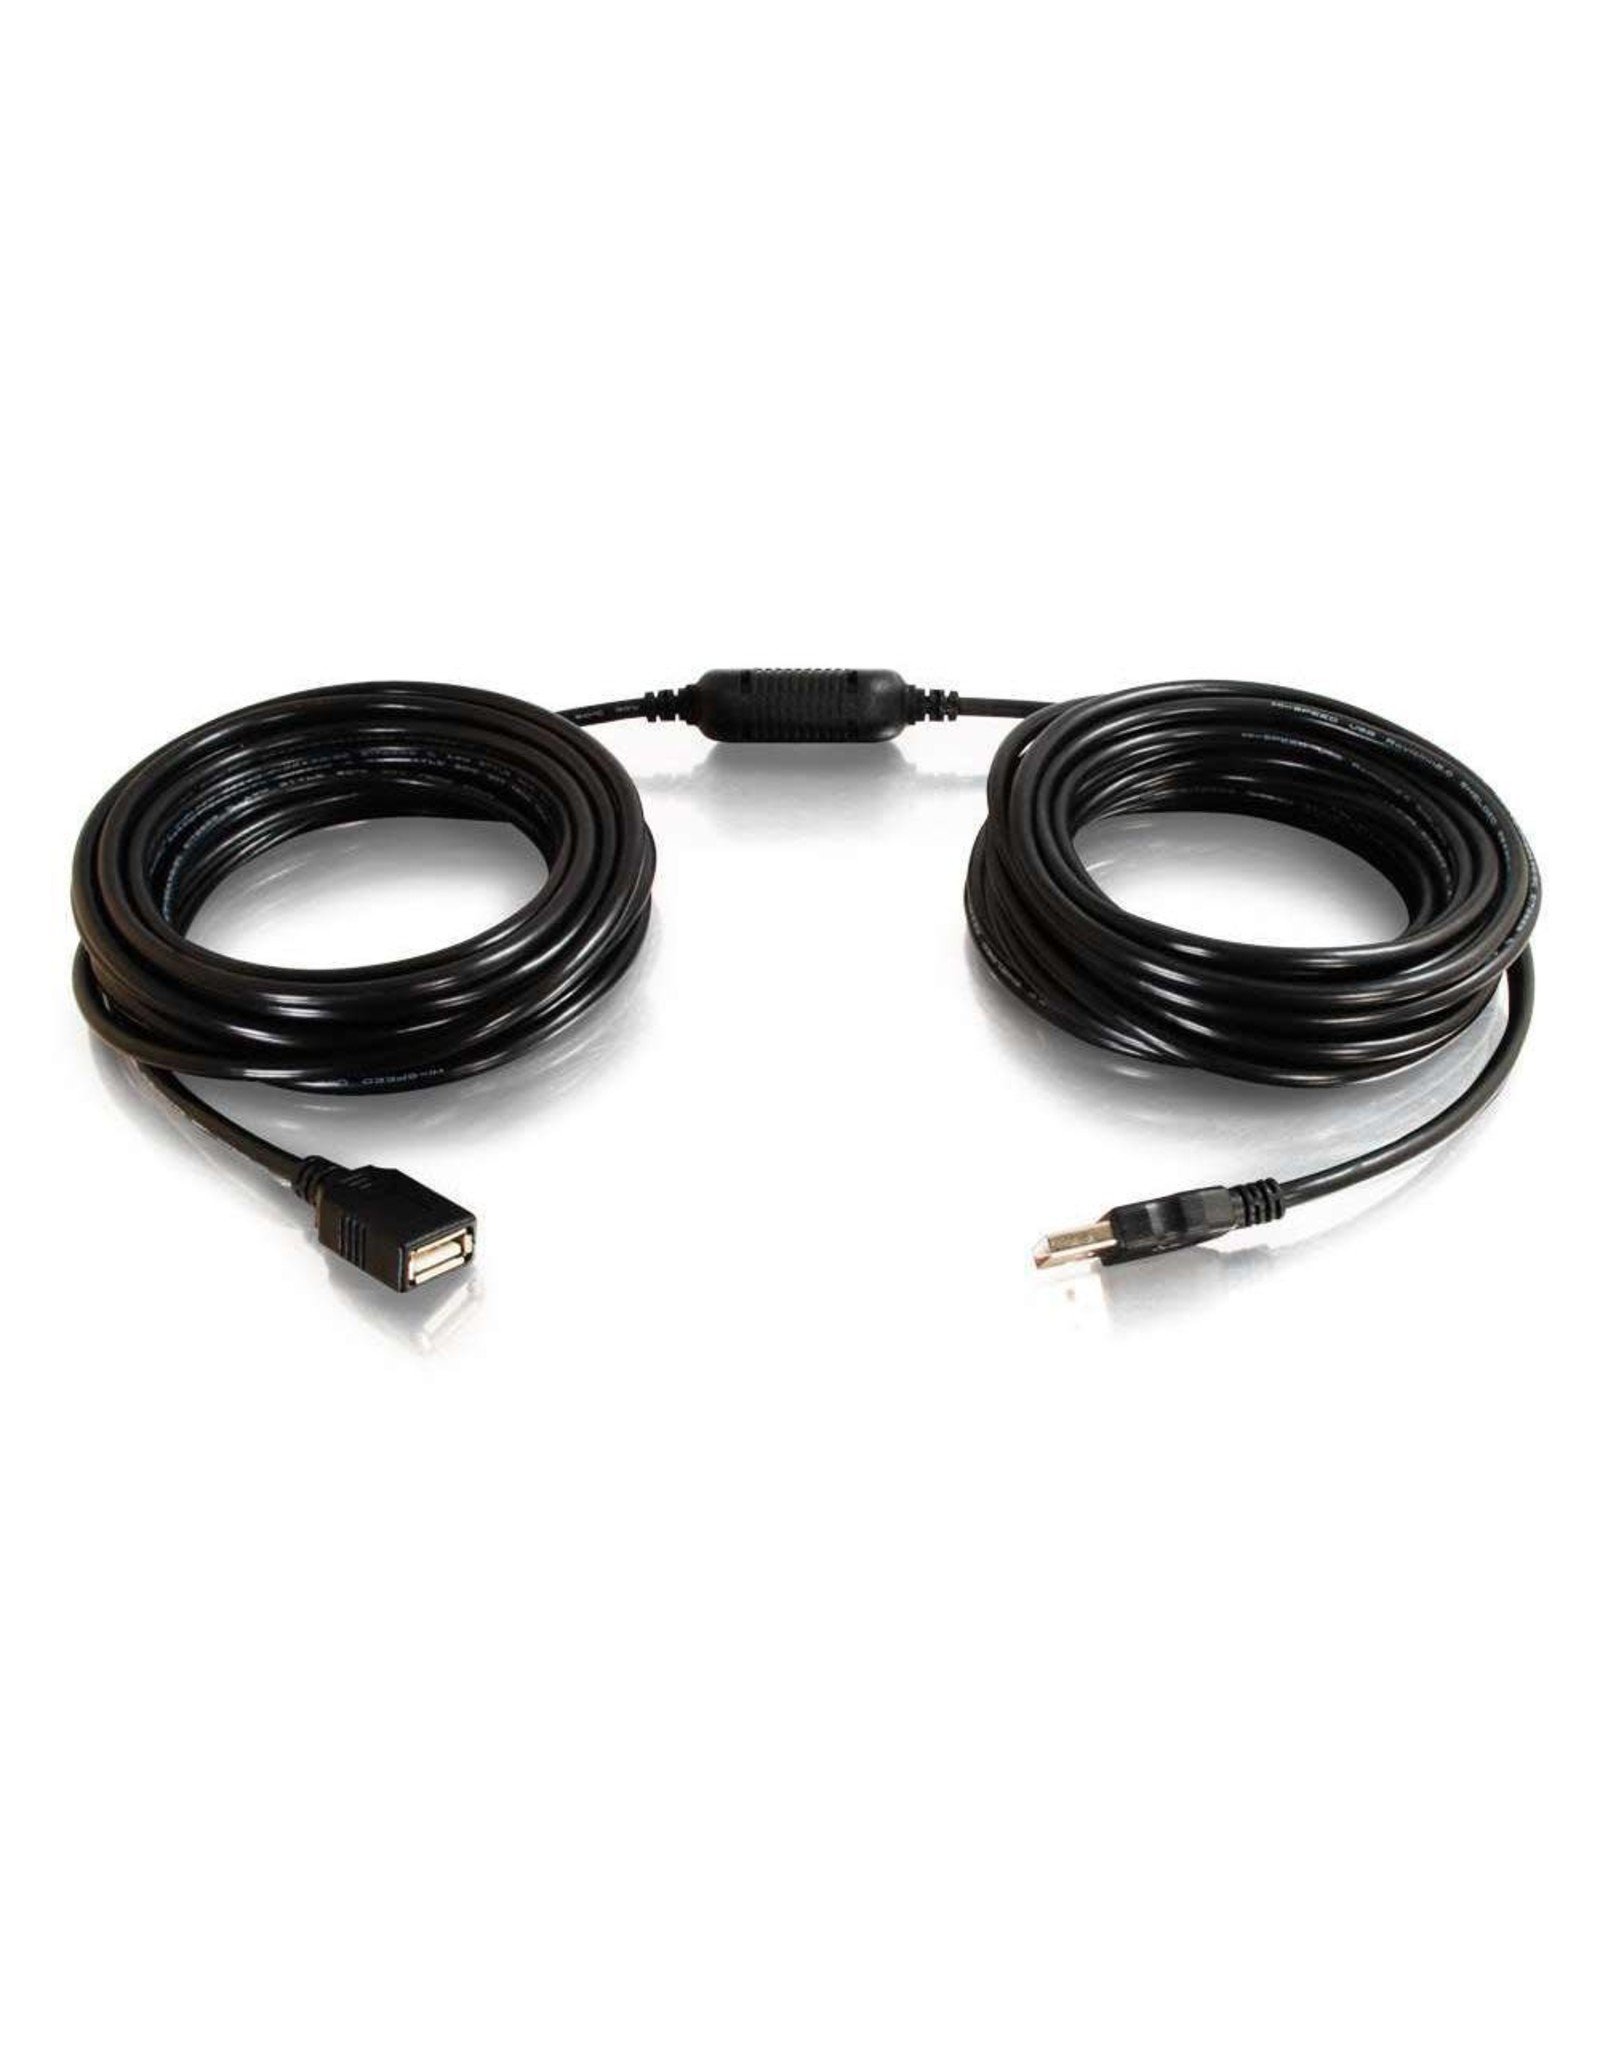 C2G 25ft USB Active Extension Cable